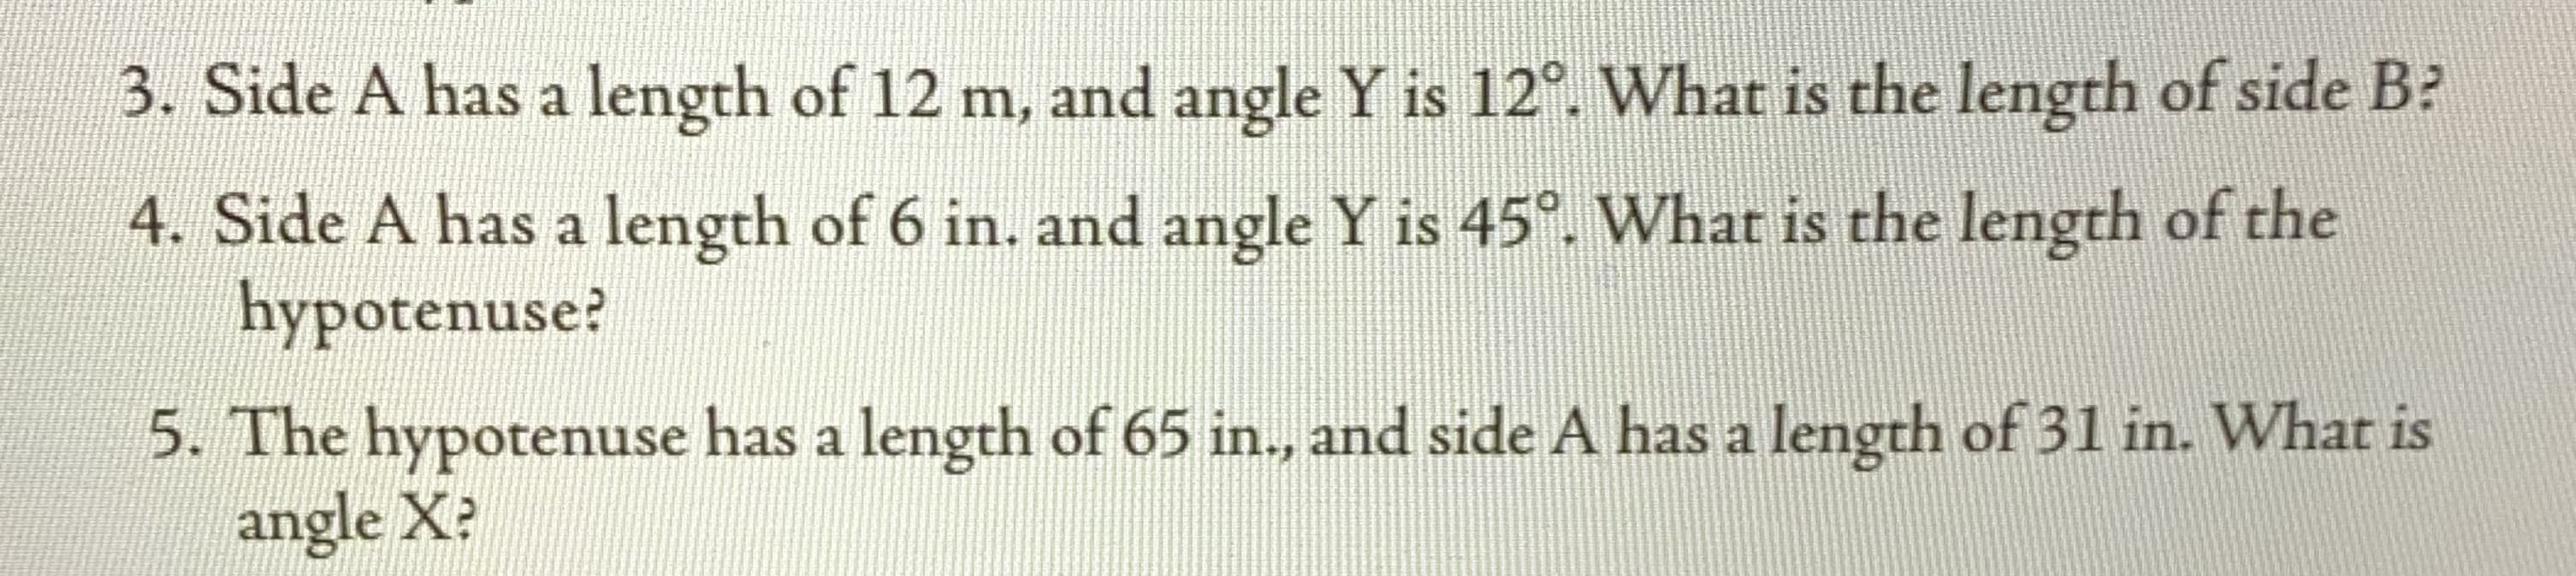 3. Side A has a length of 12 m, and angle Y is 12°. What is the length of side B?
4. Side A has a length of 6 in. and angle Y is 45°. What is the length of the
hypotenuse?
5. The hypotenuse has a length of 65 in., and side A has a length of 31 in. What is
angle X?
